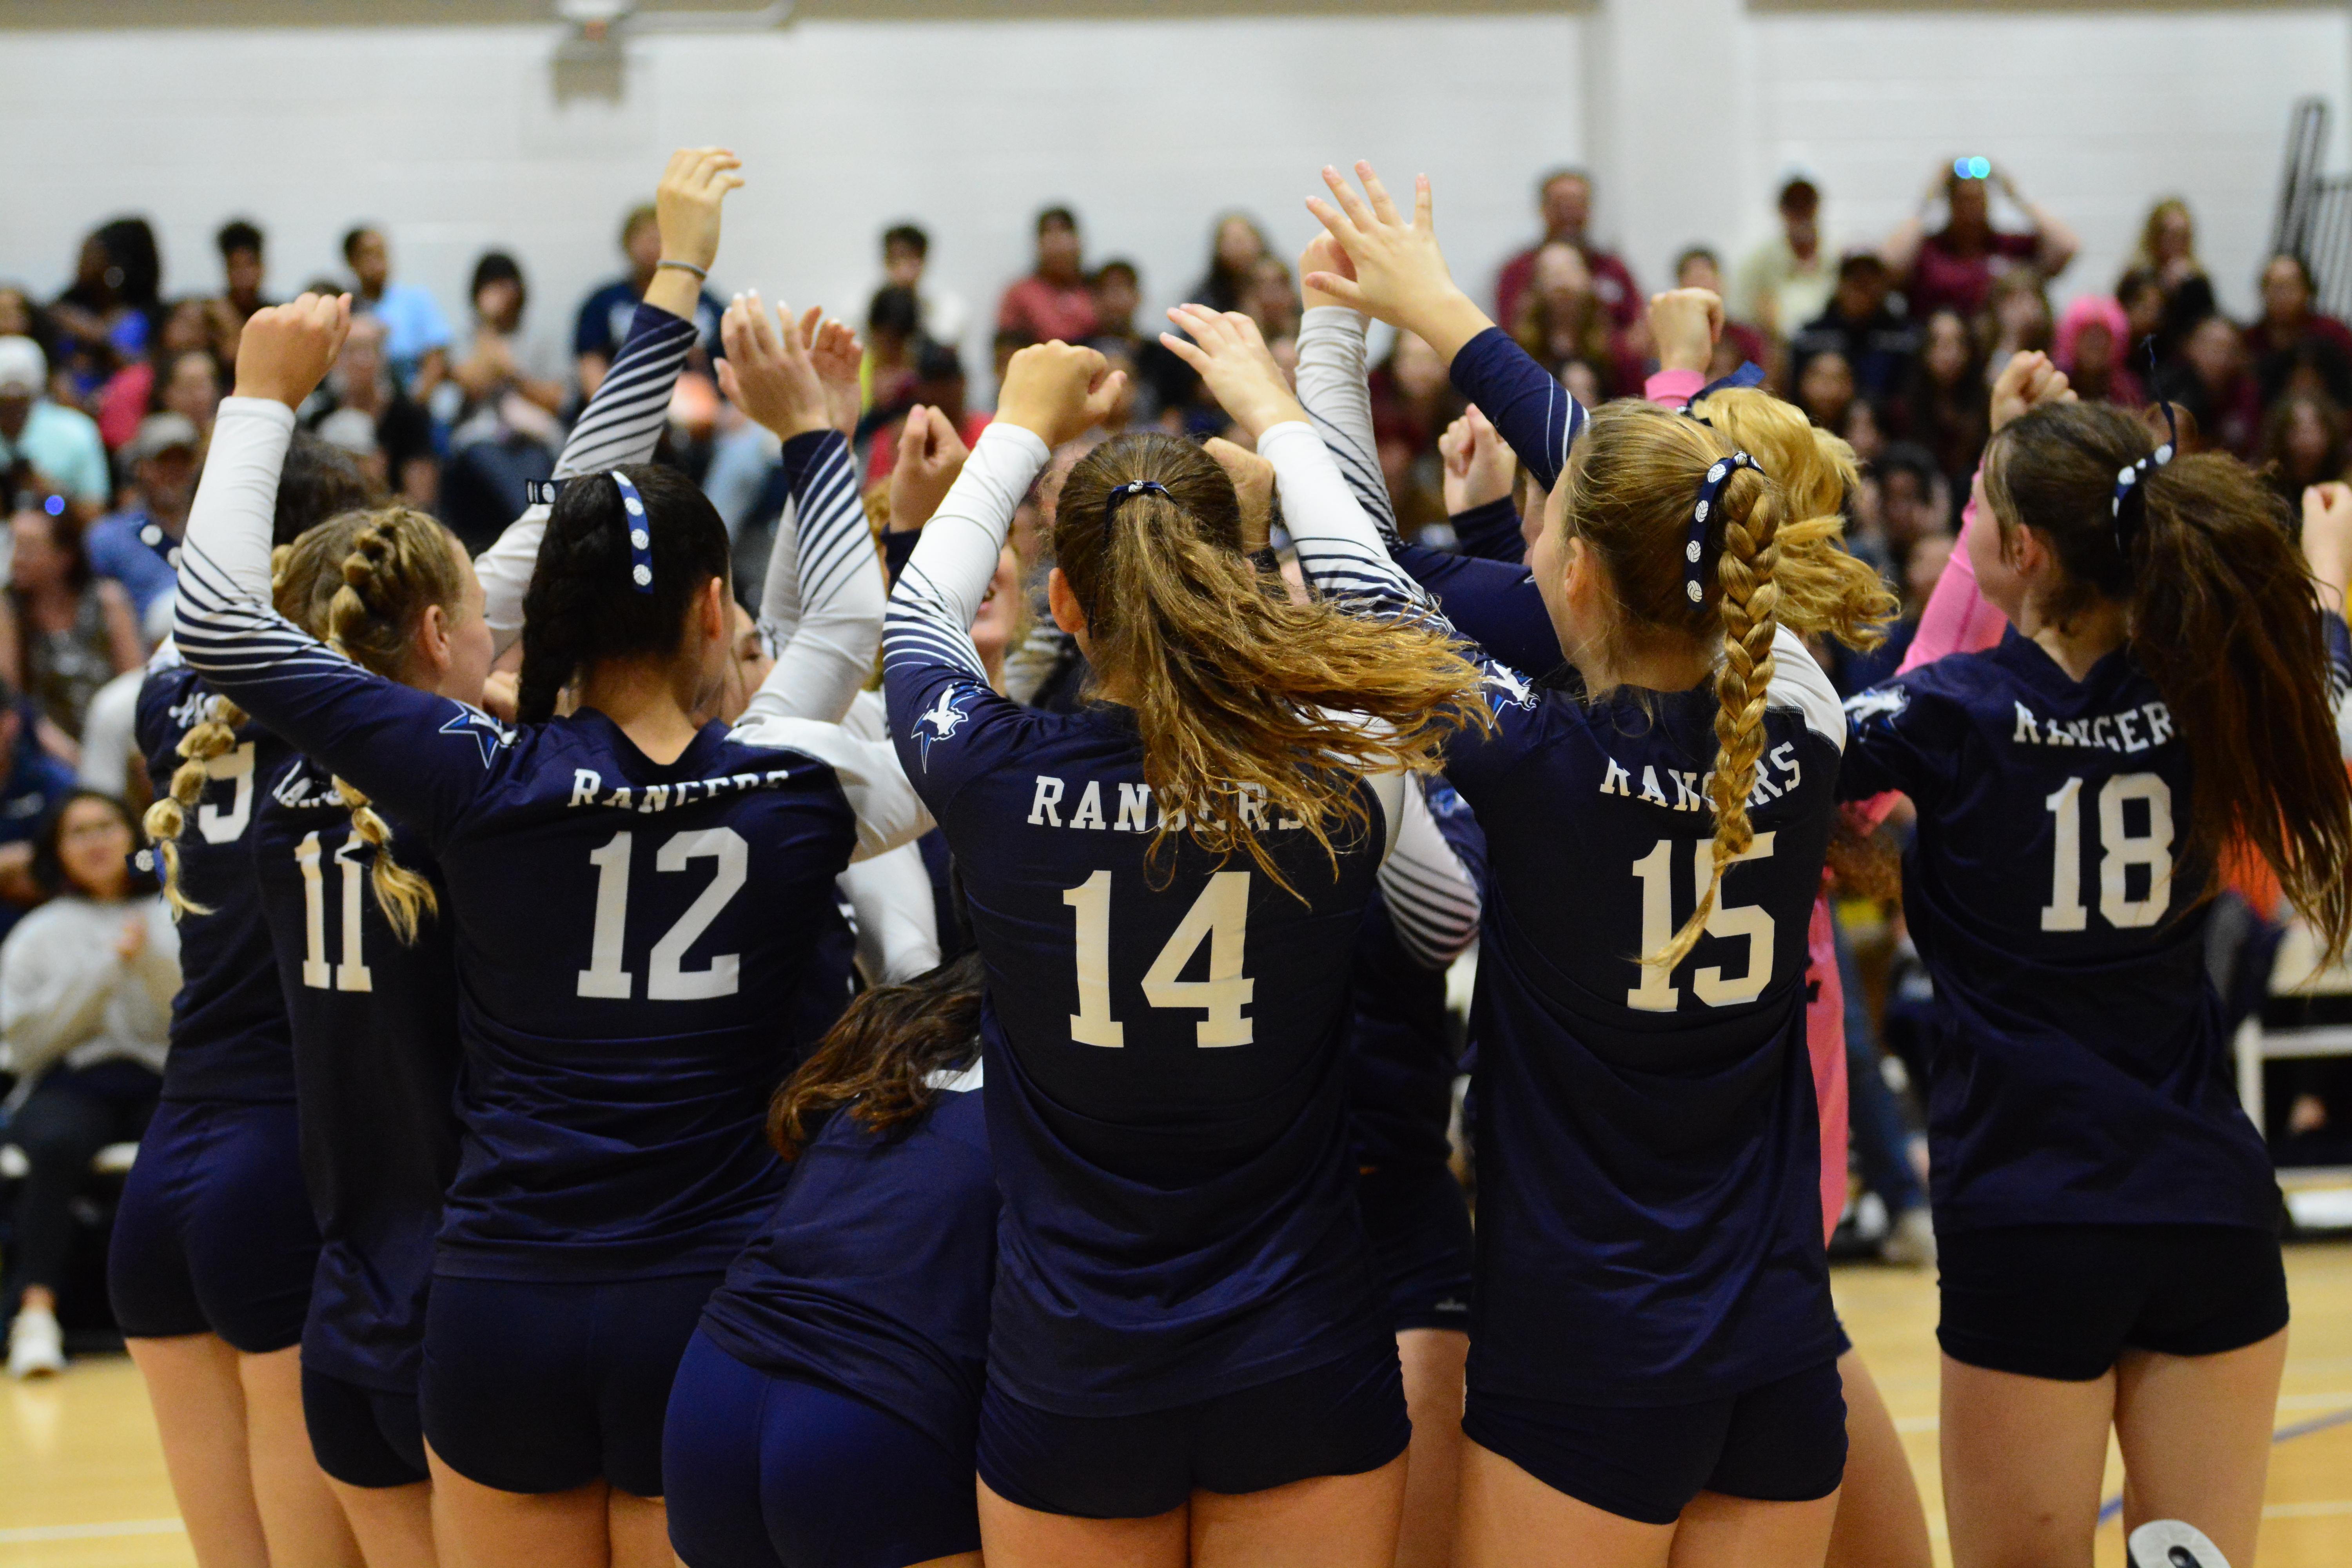 The volleyball athletes huddled together on the court, with their hands up in the air, wearing ribbons on their hair. From left to right: volleyball uniform numbers 9, 11, 12, 14, 15, and 18.